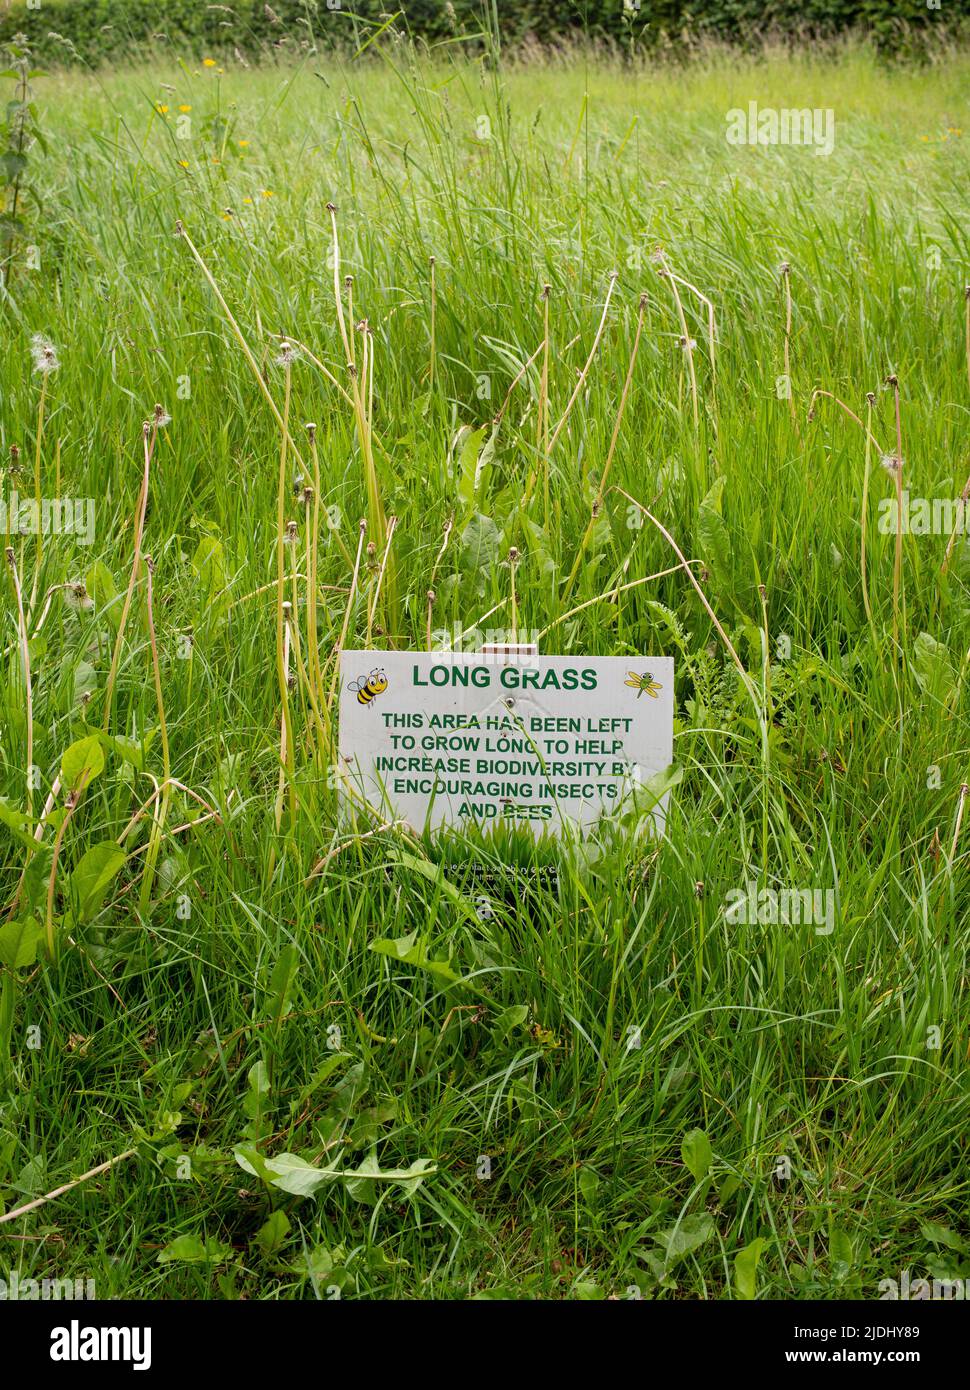 Area of Long overgrown grass in Salisbury city centre park left uncut to help increase biodiversity. With information sign to explain to public. Stock Photo